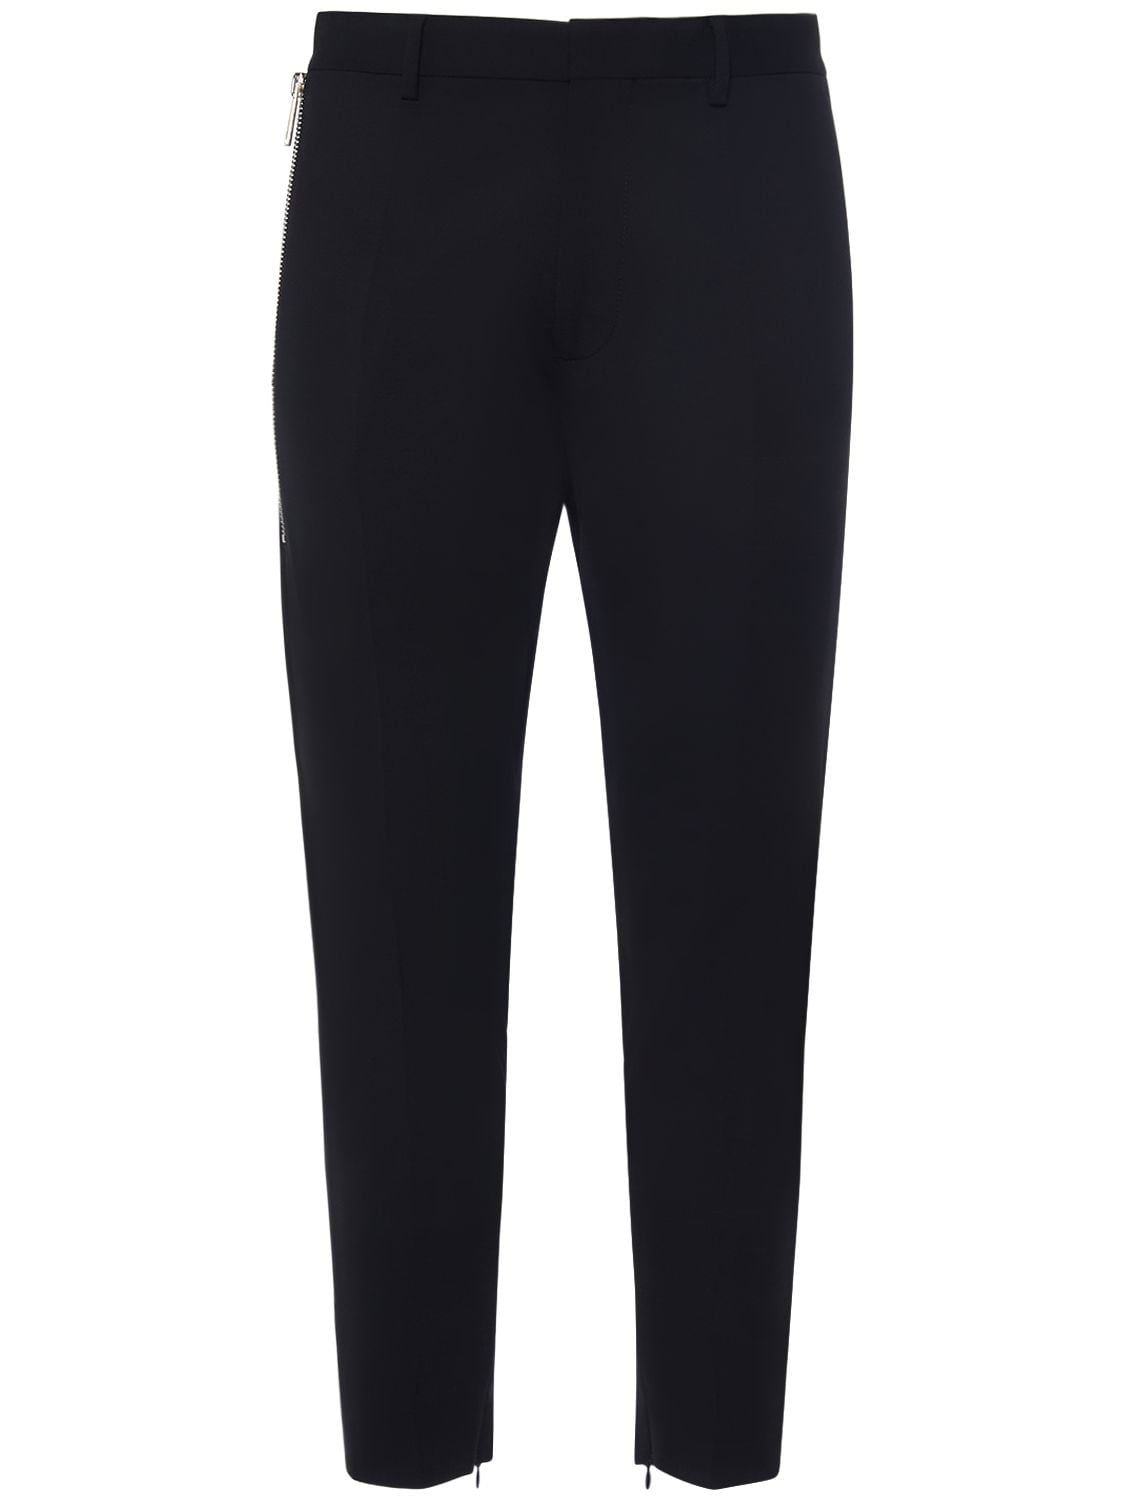 Image of Ceresio 9 Skinny Stretch Wool Pants